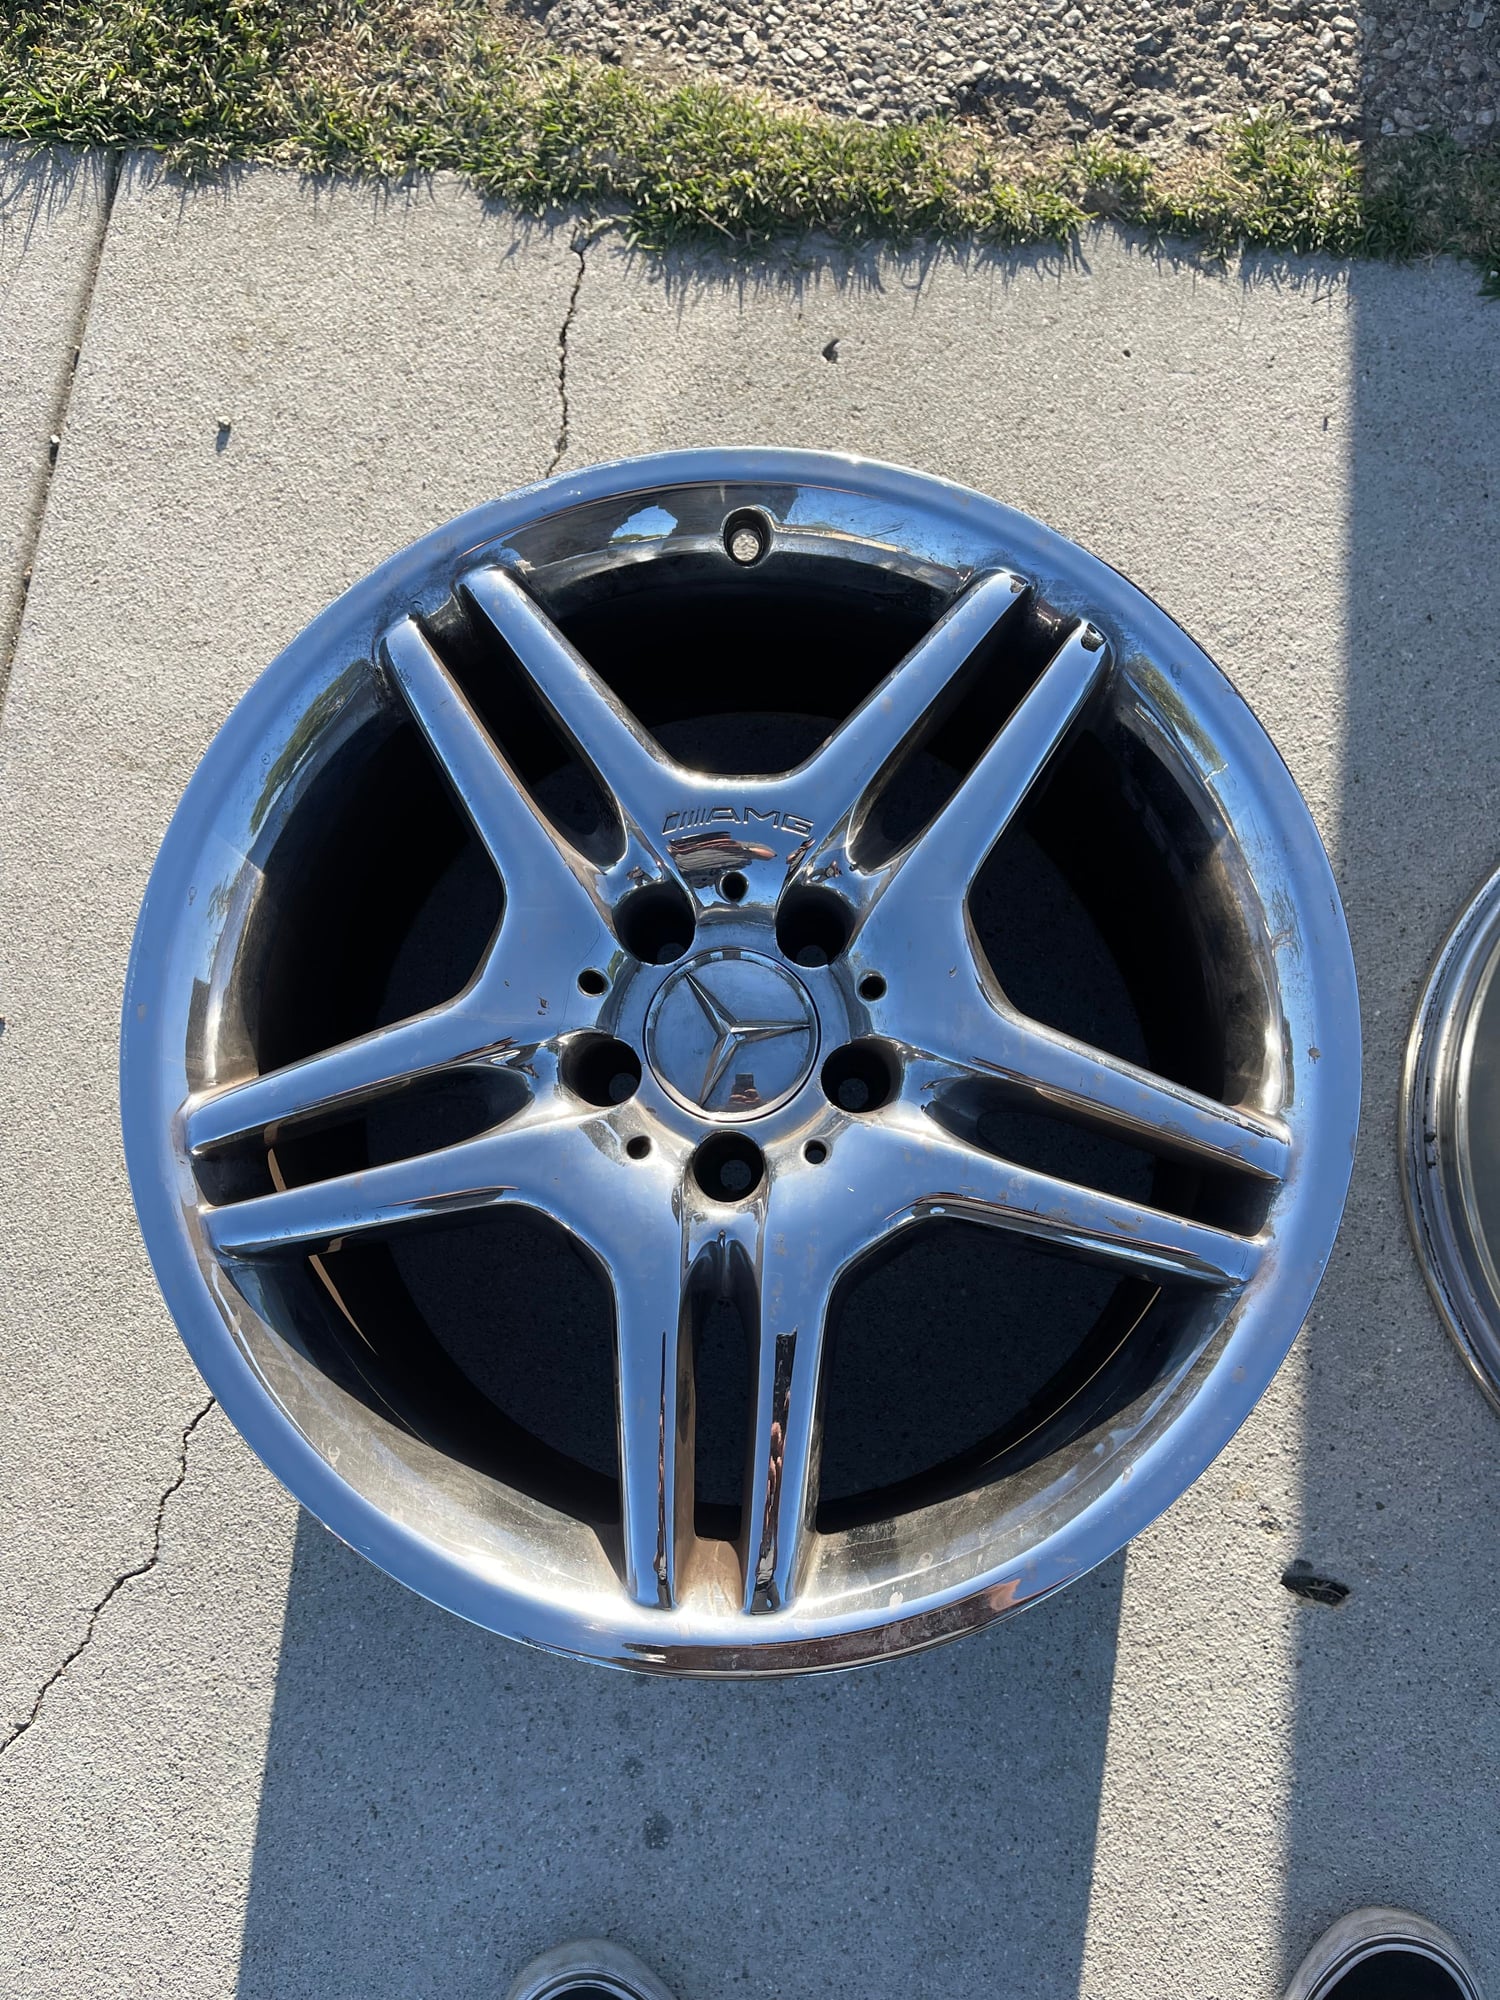 Wheels and Tires/Axles - SoCal - Staggered 18” Chrome AMG Wheels - Used - 0  All Models - Los Angeles, CA 90012, United States